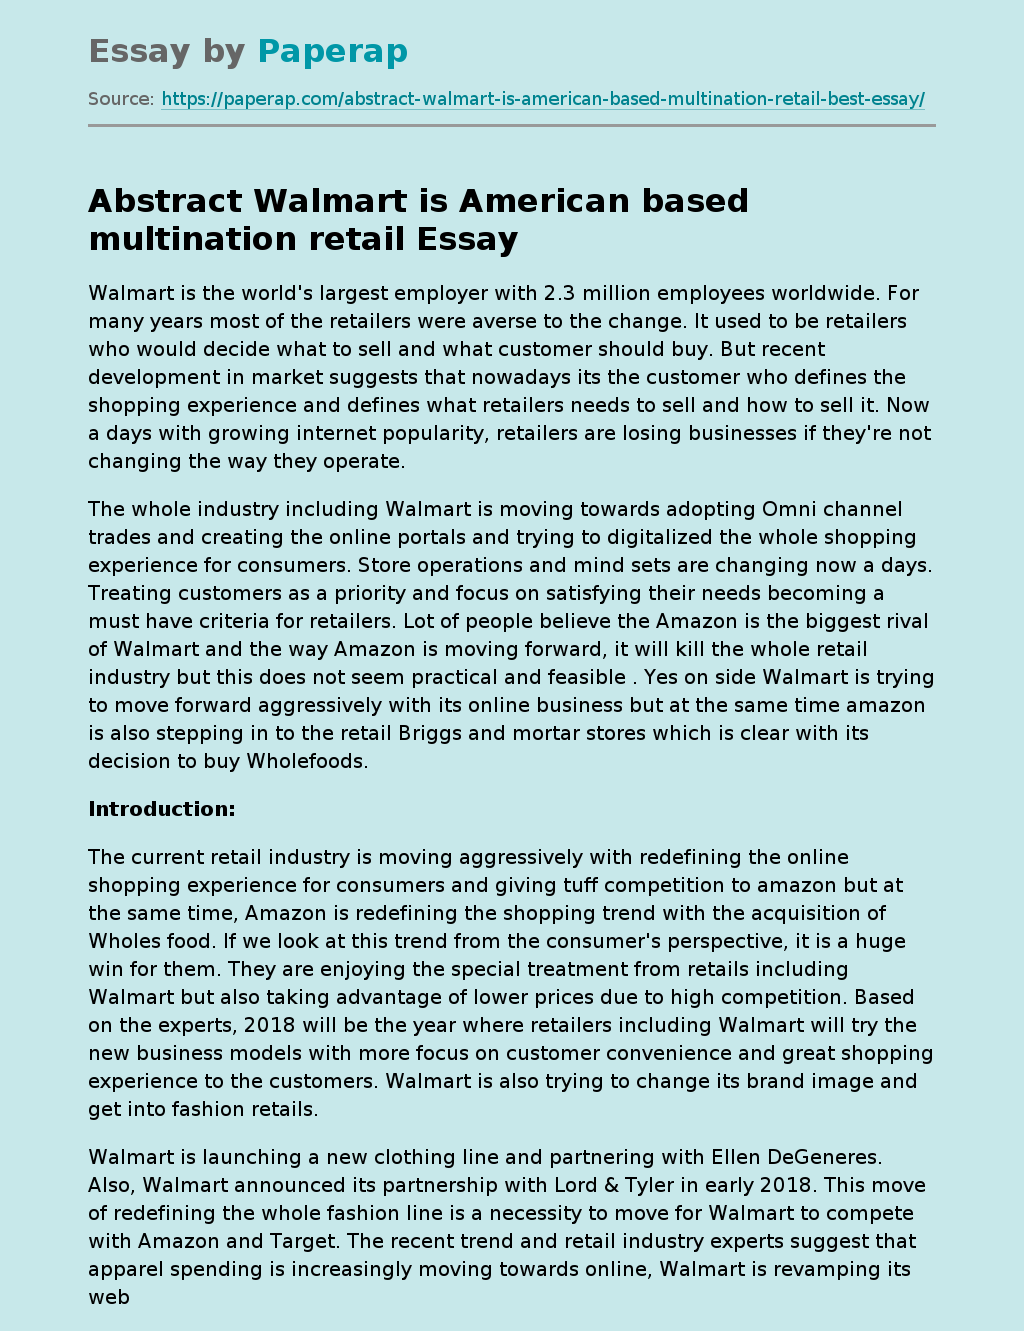 Abstract Walmart is American based multination retail